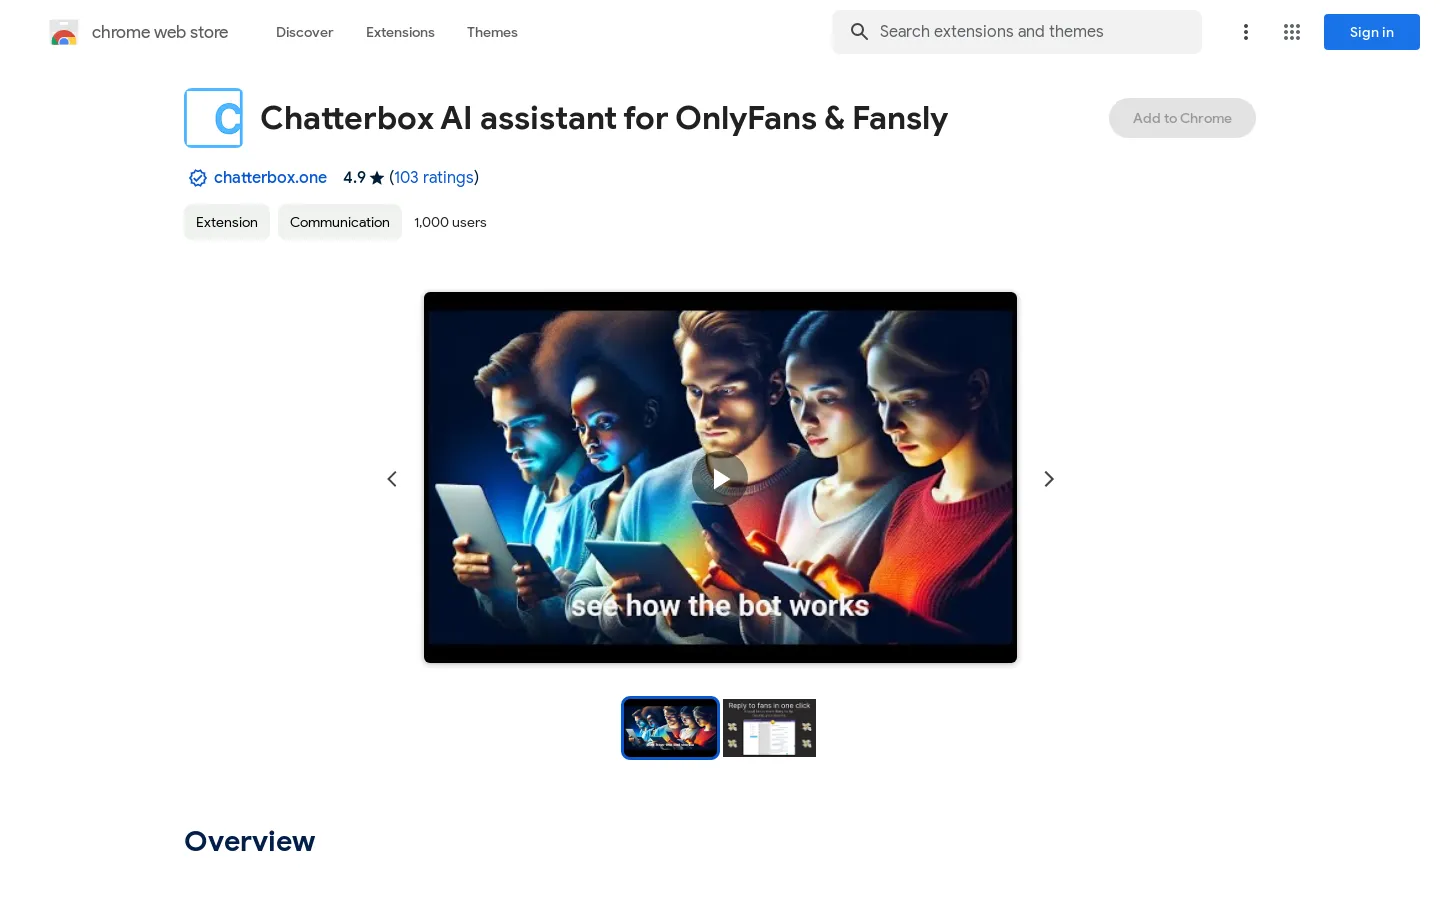 Chatterbox AI assistant for OnlyFans & Fansly